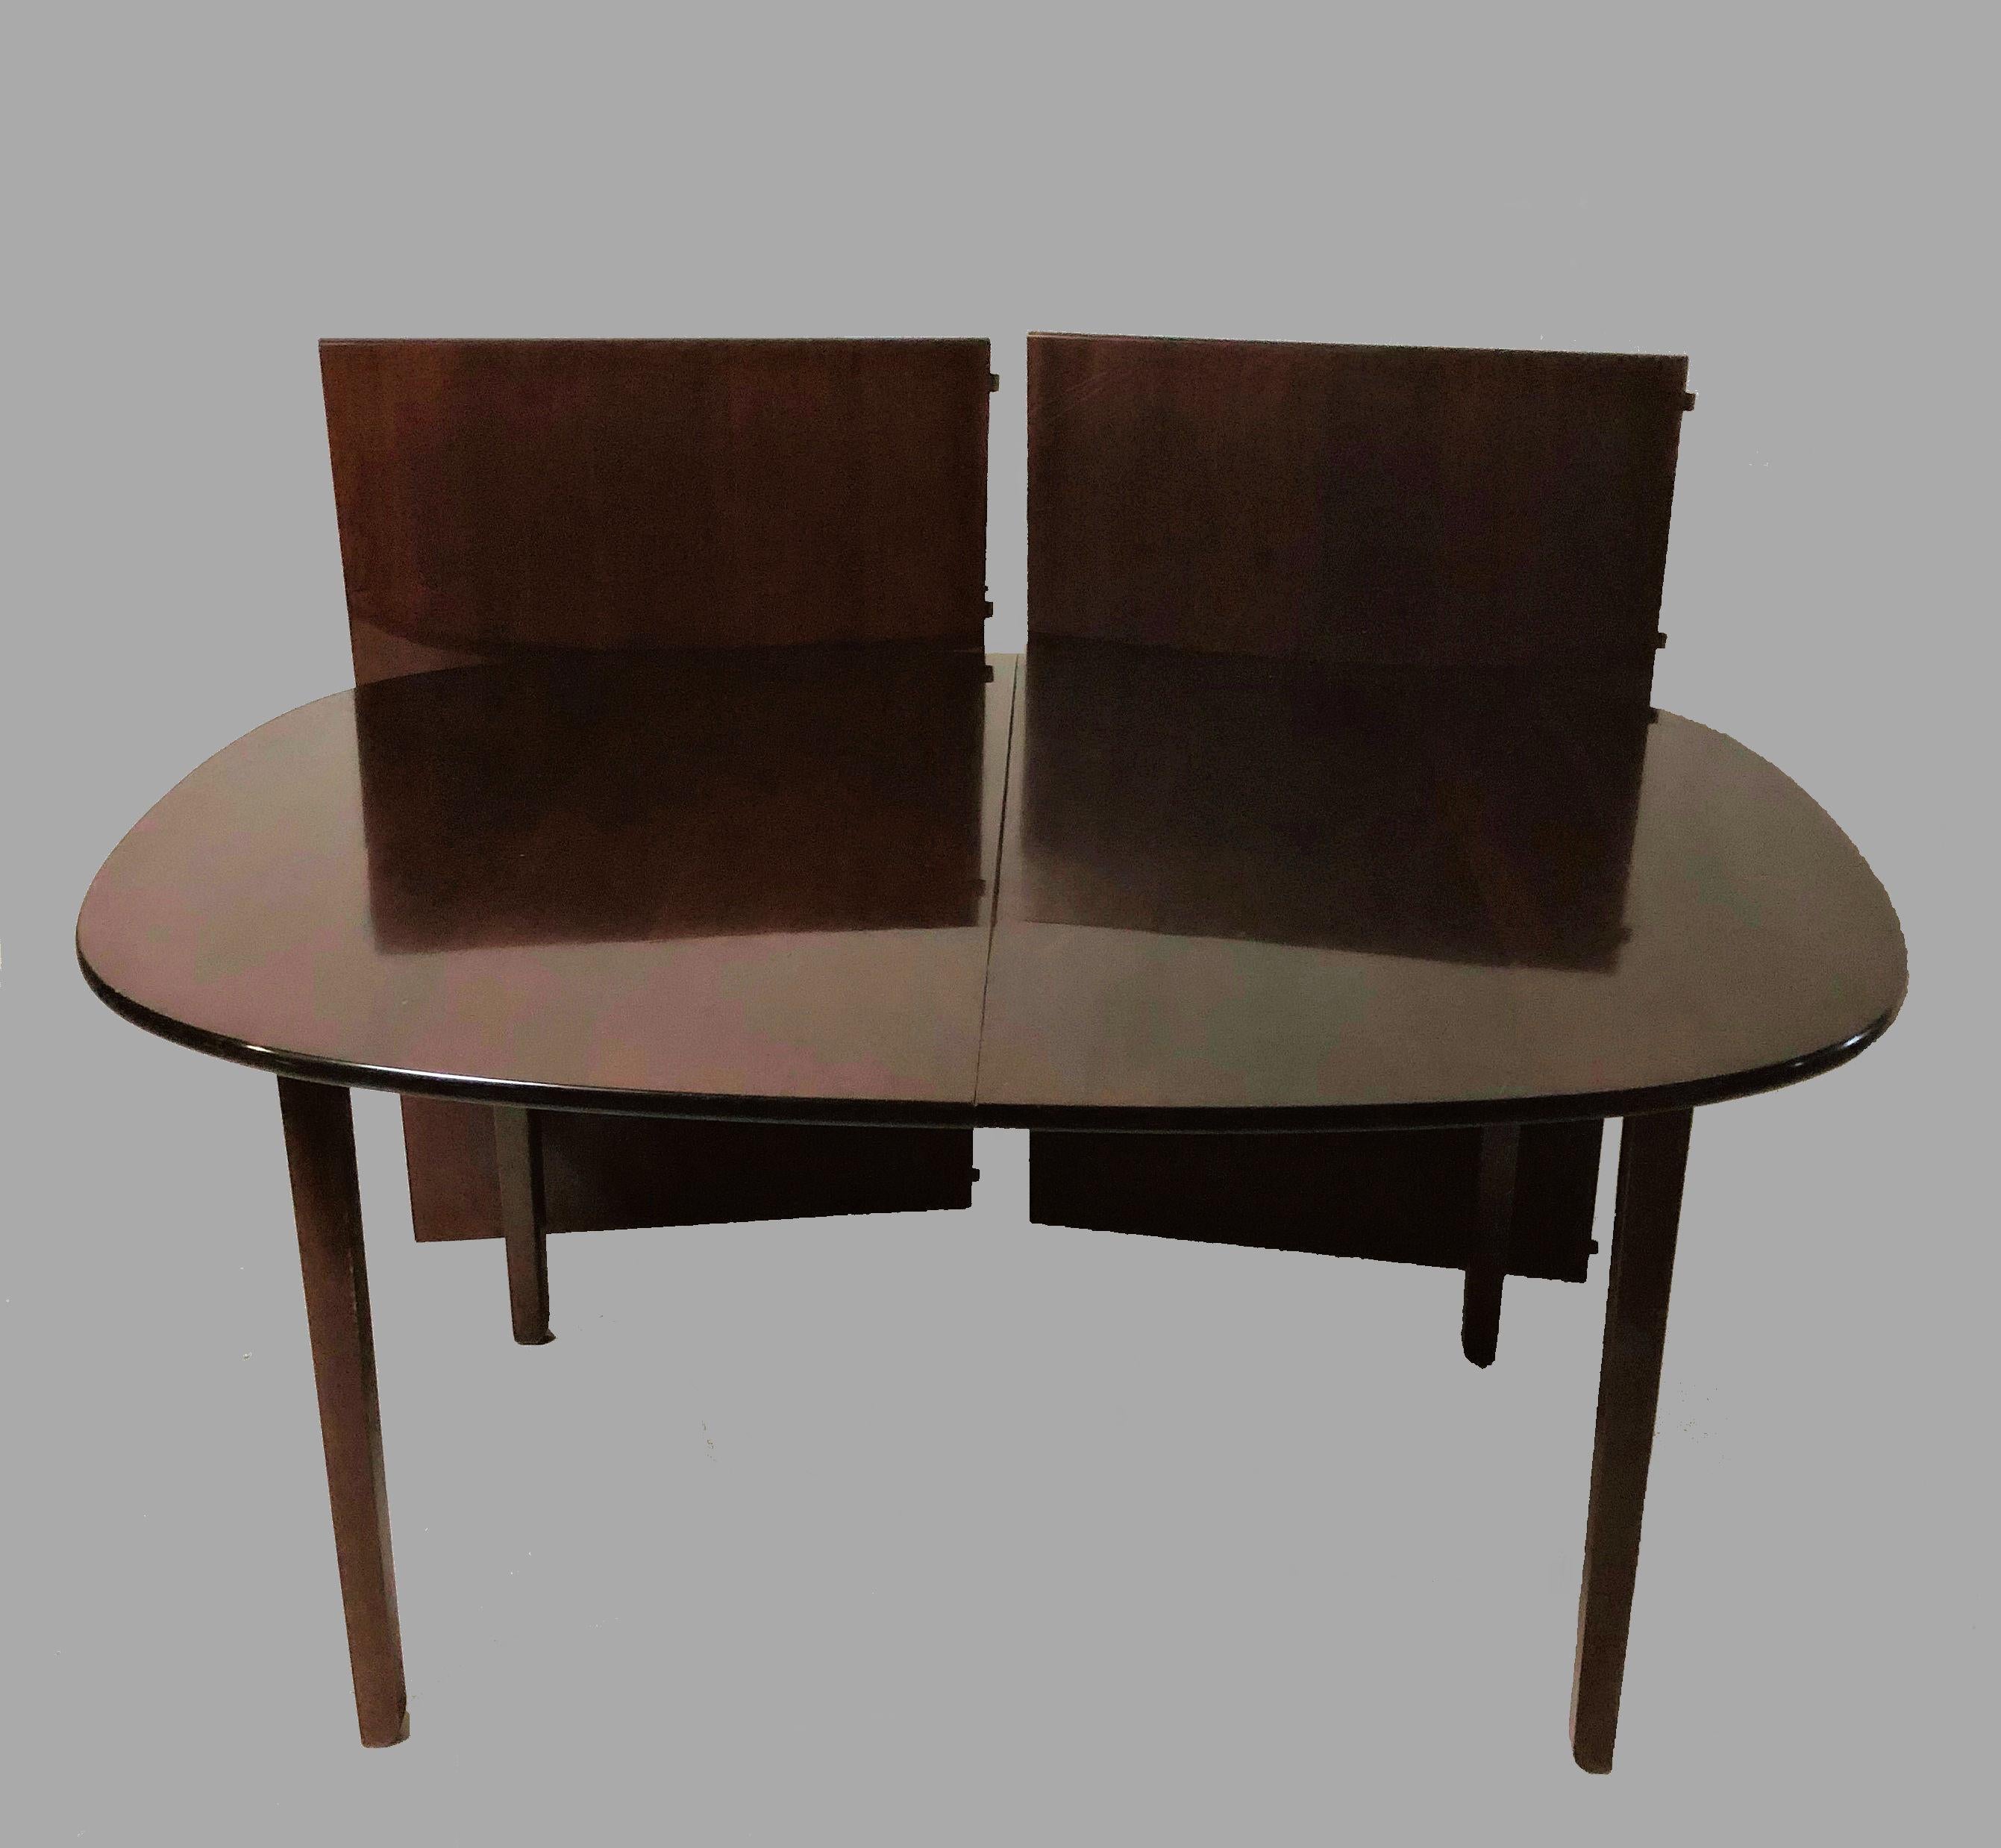 Expandable Ole Wanscher Rungstedlund dining table with two extra leaves by P. Jeppesen.

The dining table has been checked and refinished by our cabinetmaker to ensure that it's is in good condition.

Seizes cm./inch:
Dining table: H 73 / 28.74, W